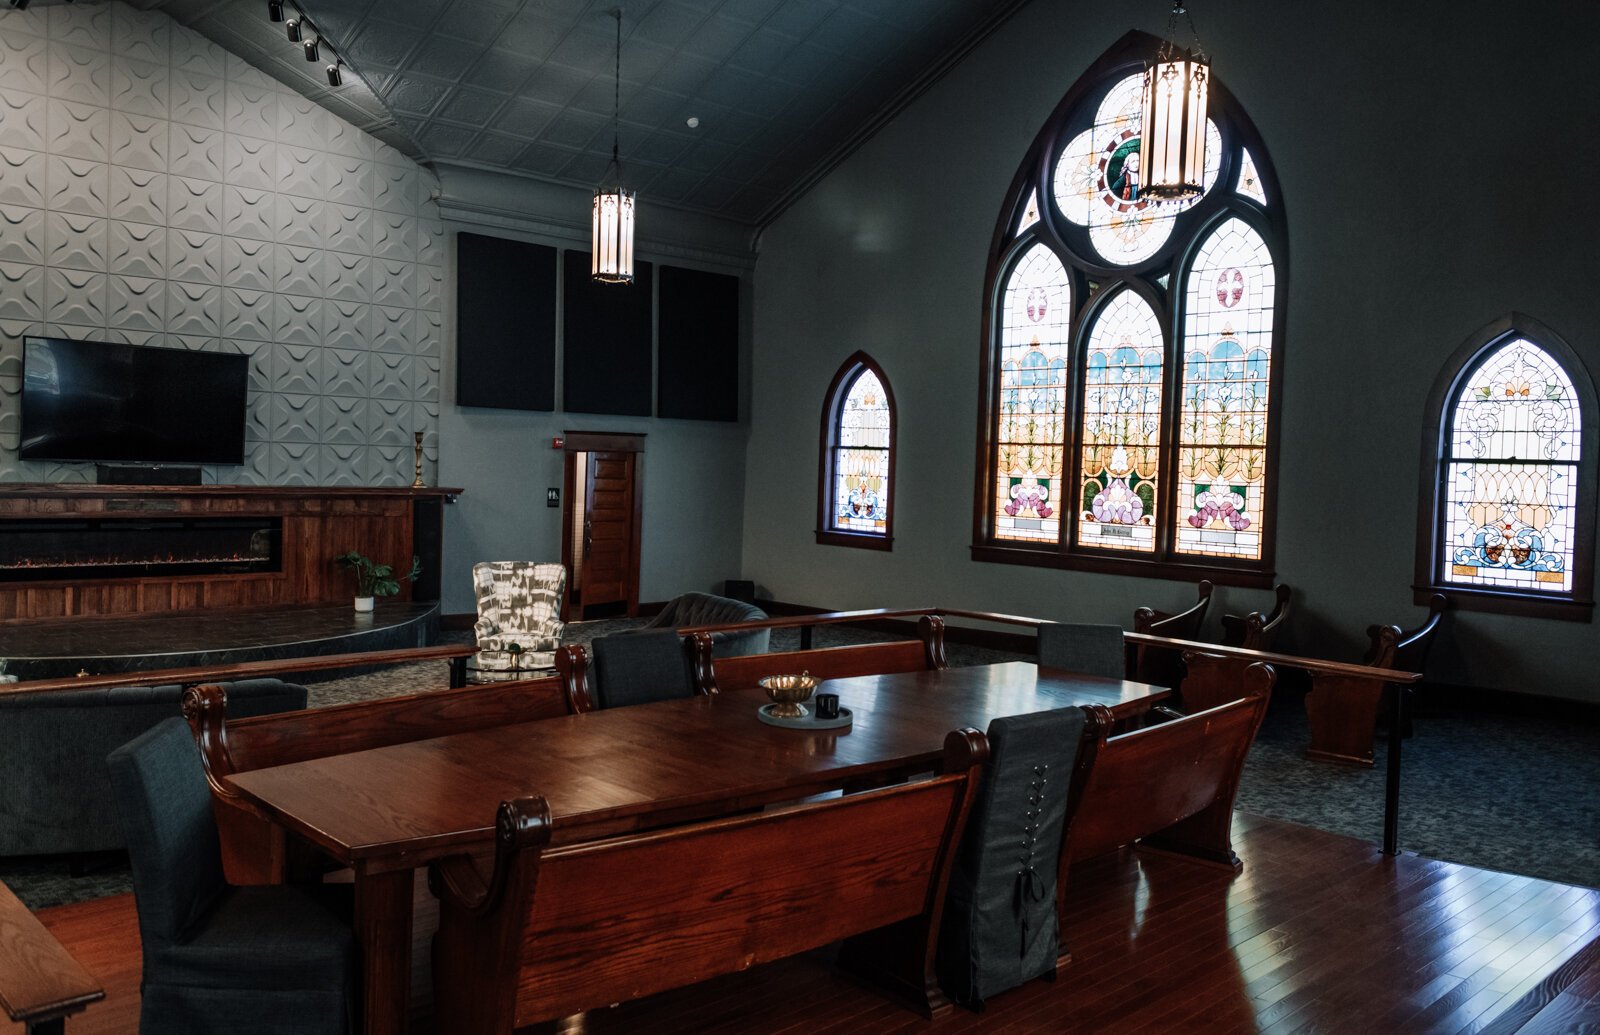 The dining room table on the main level of the Sanctuary seats 16 guests.